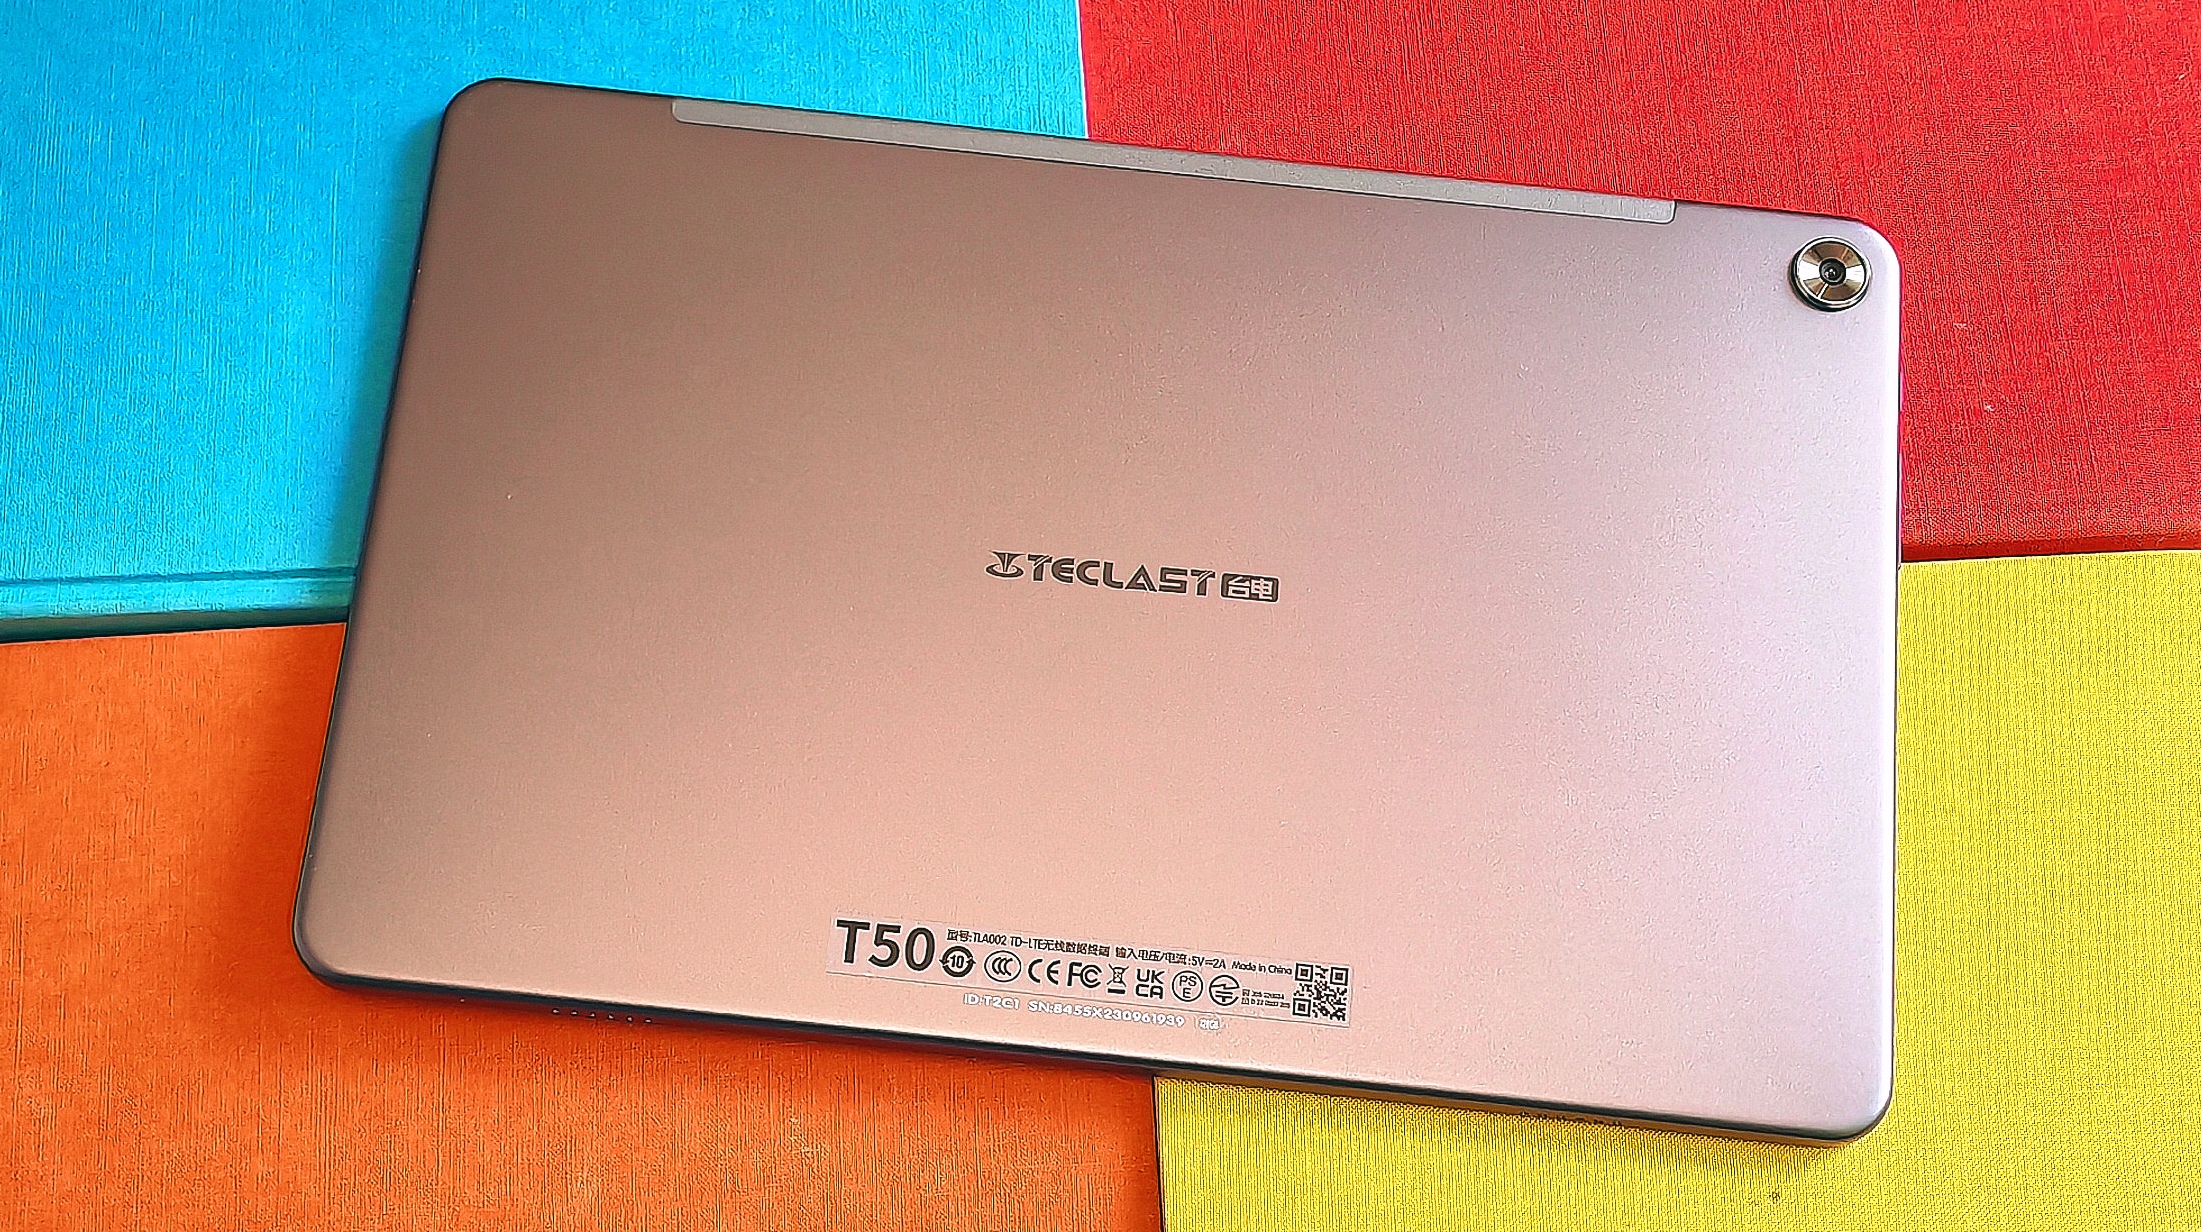 Teclast T50 Tablet review - The price-performance ratio rocks